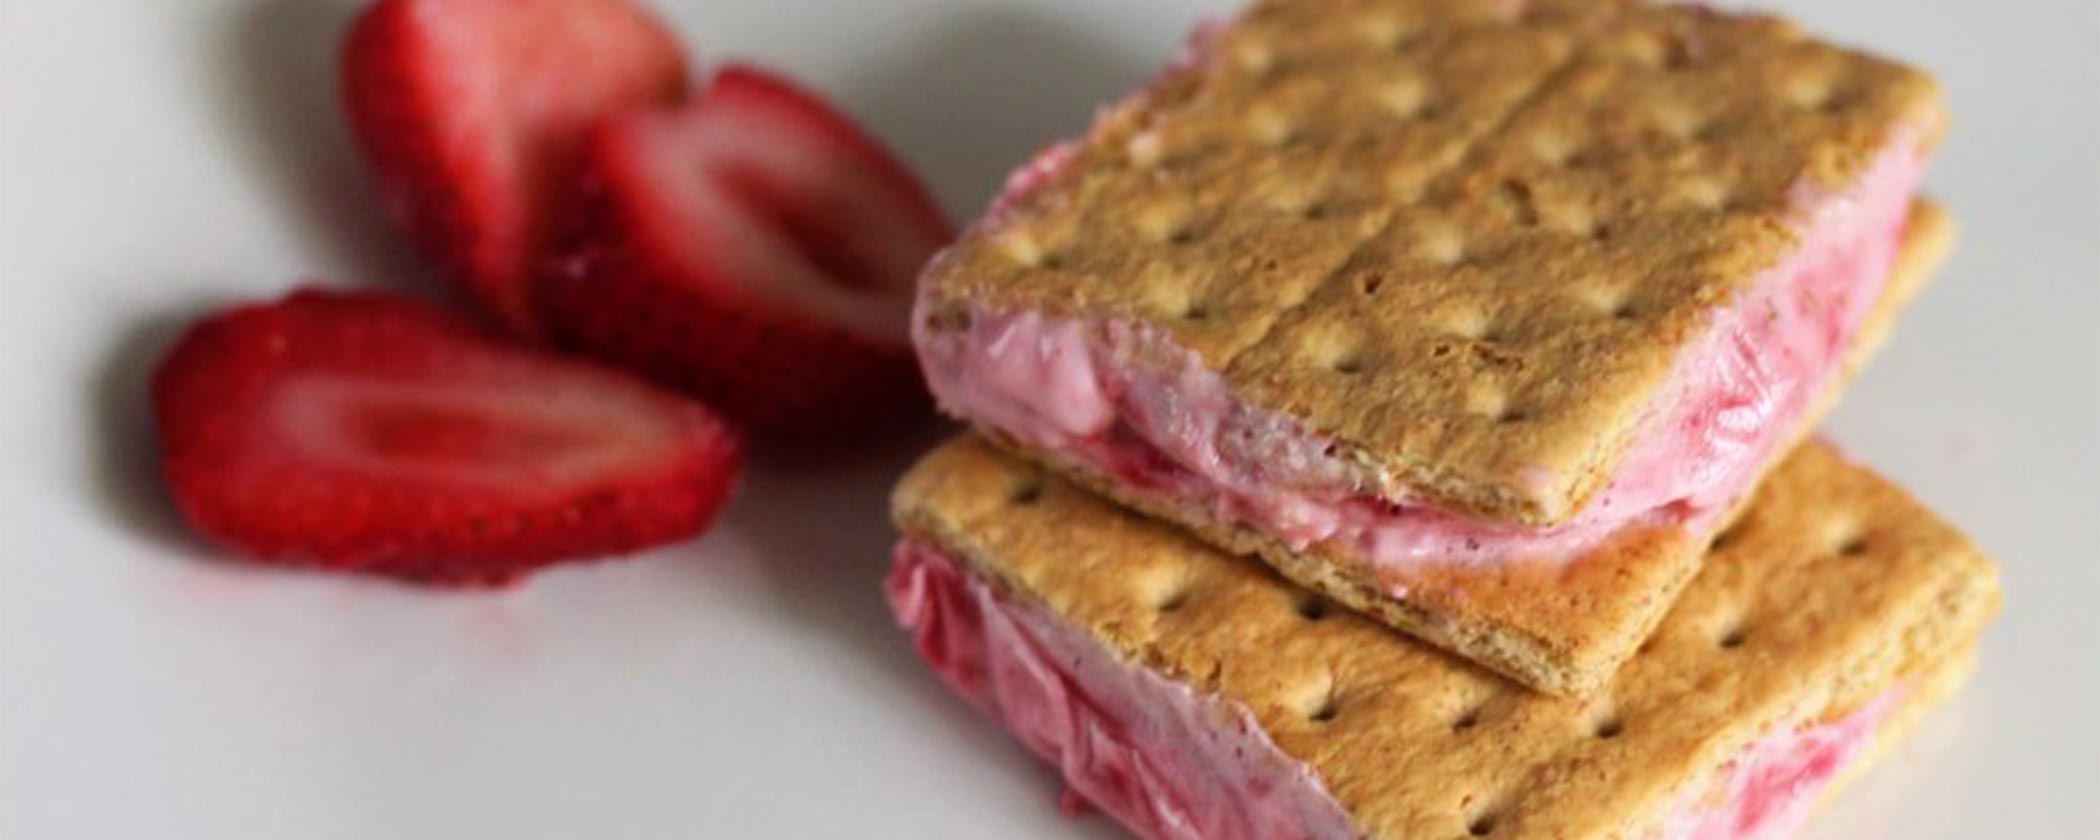 featured image for Mainely Dish: Frozen Strawberry Sandwiches